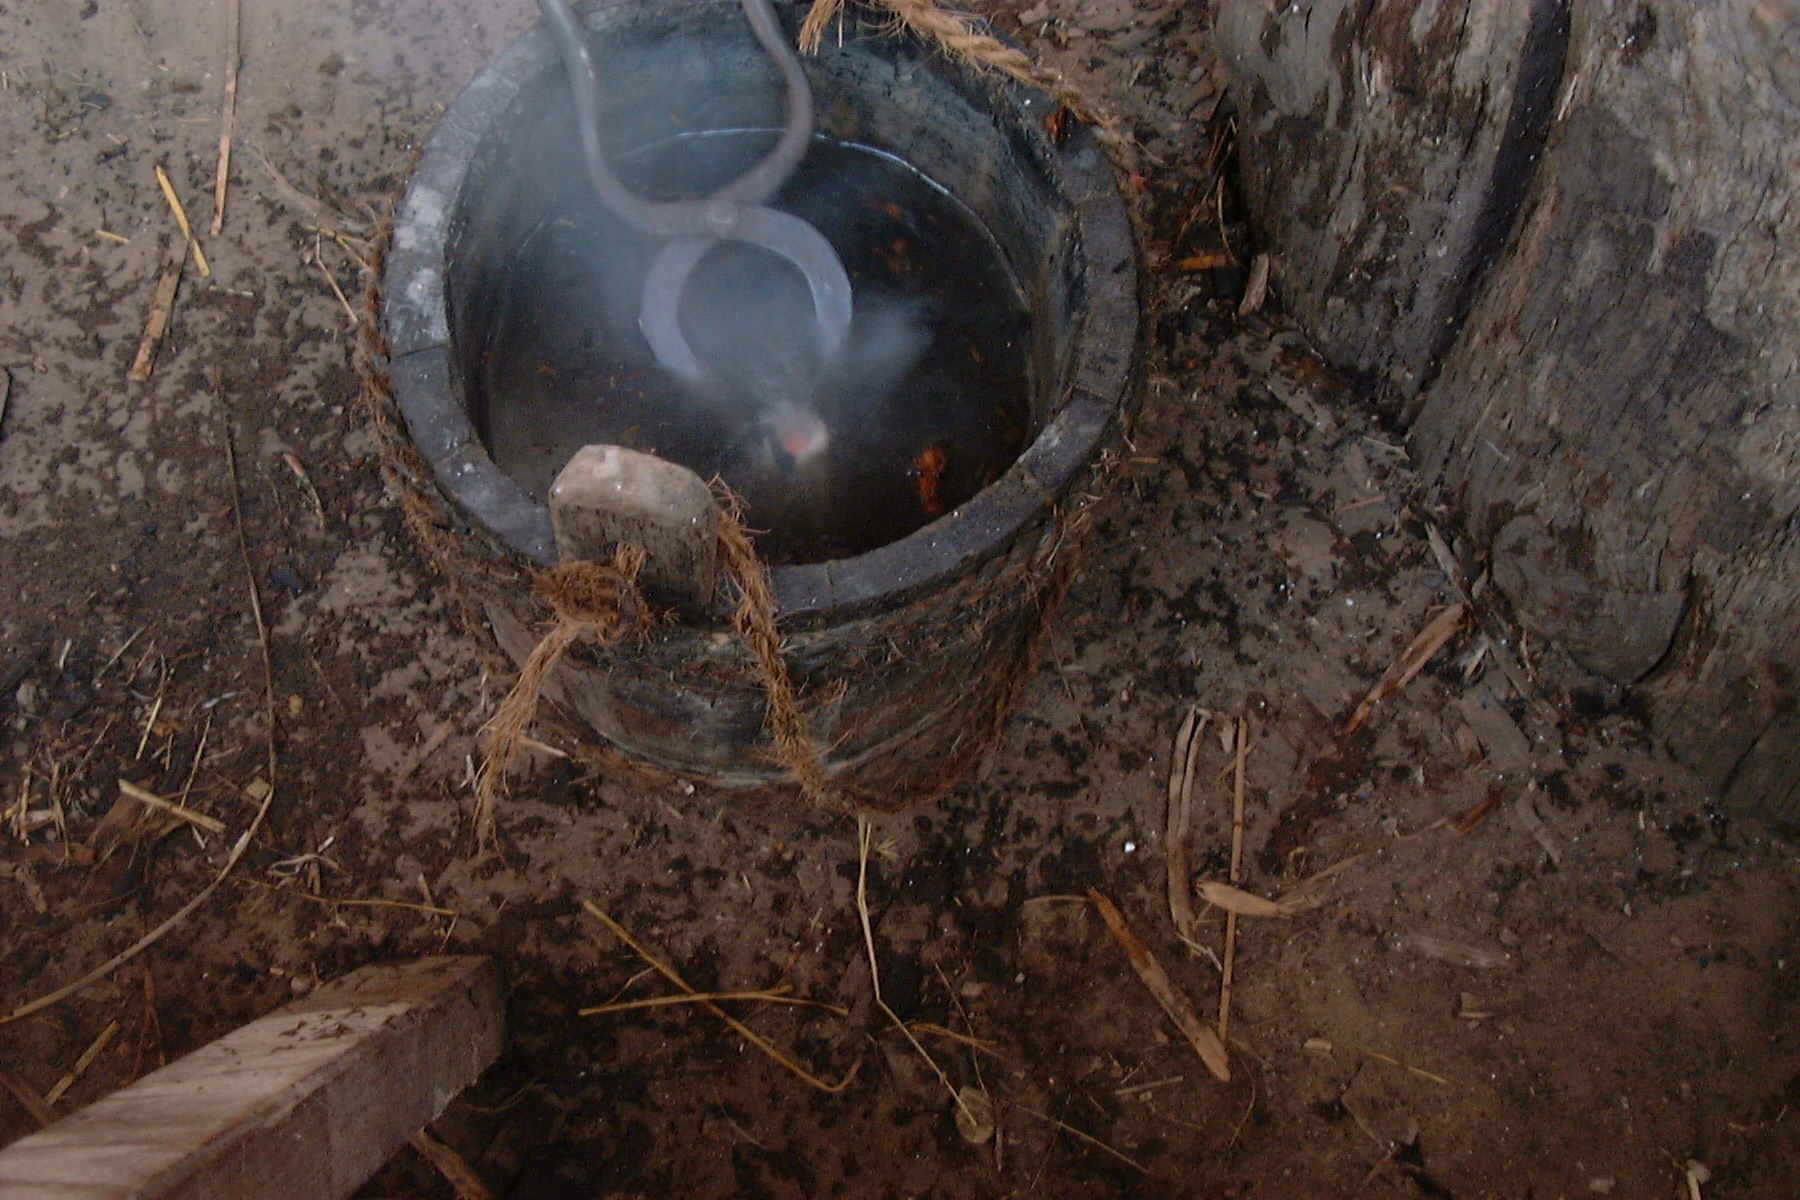 WEST STOW FORGE HOT FLASK IN BUCKET.jpg